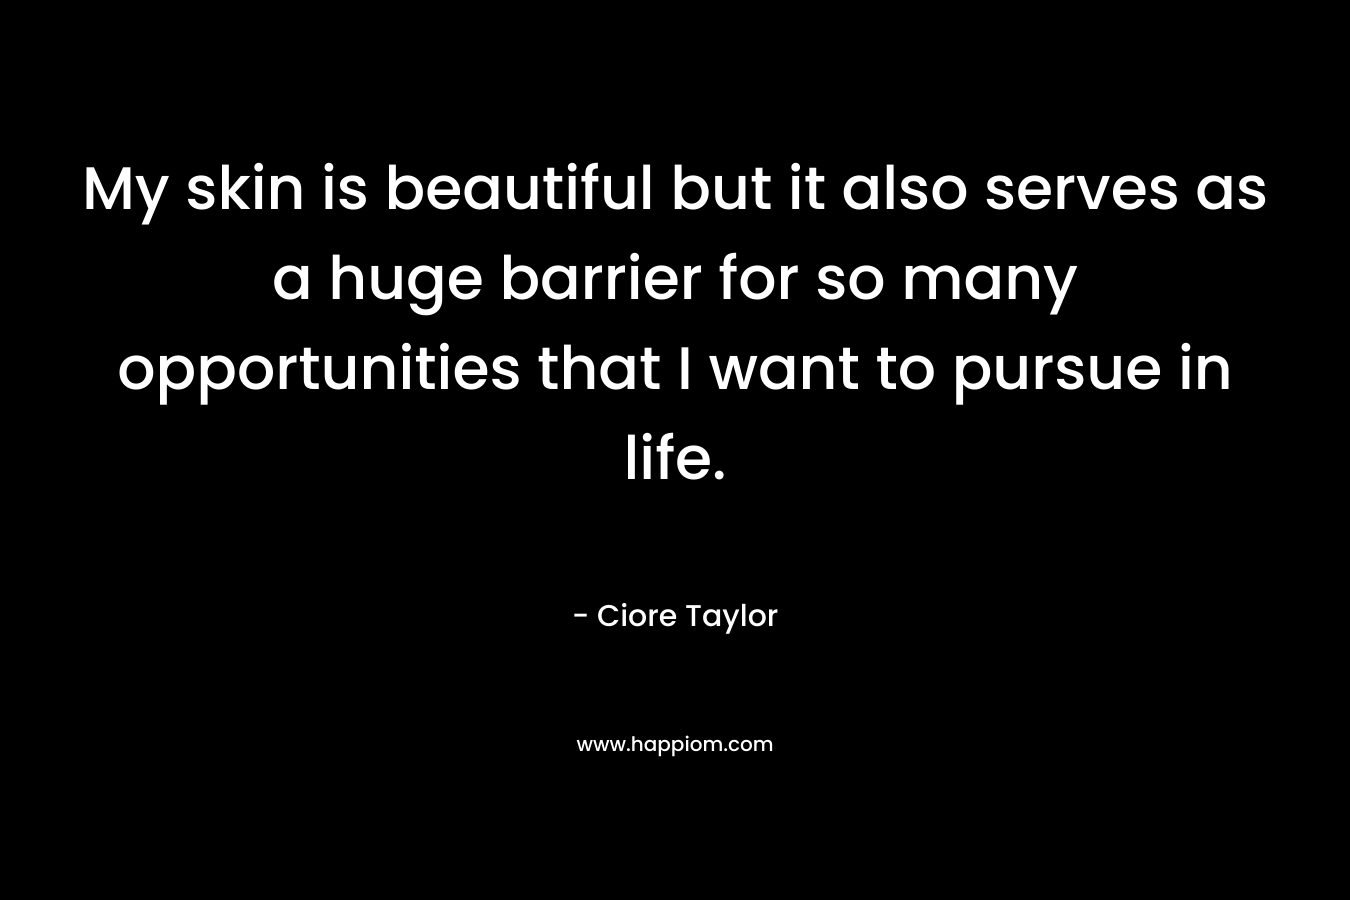 My skin is beautiful but it also serves as a huge barrier for so many opportunities that I want to pursue in life. – Ciore Taylor